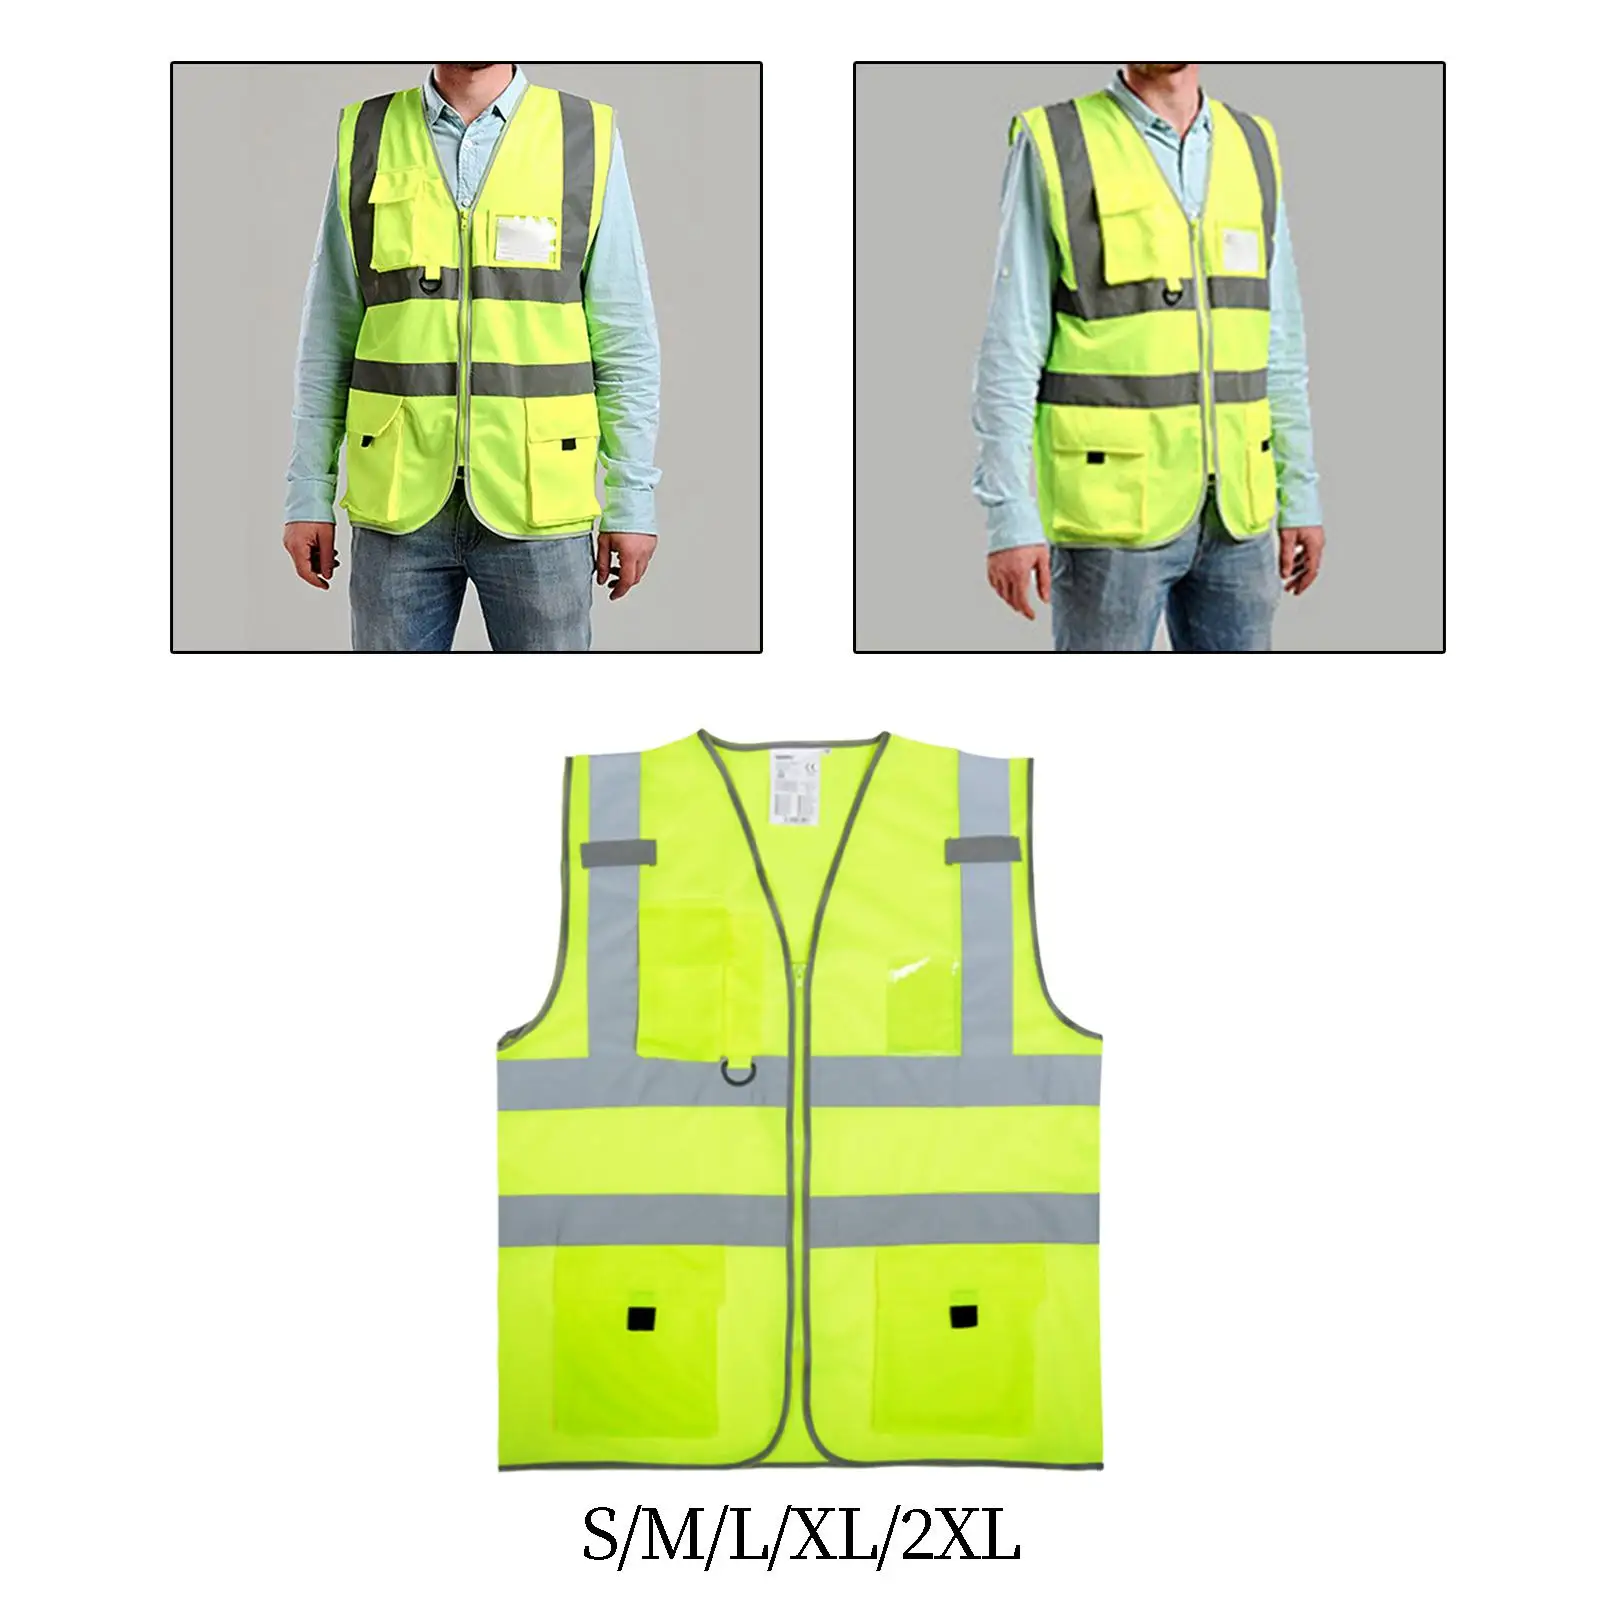 Reflective Vest Men High Visibility Comfortable Multifunctional Construction Protector for Traffic Airport Racing Running Sports